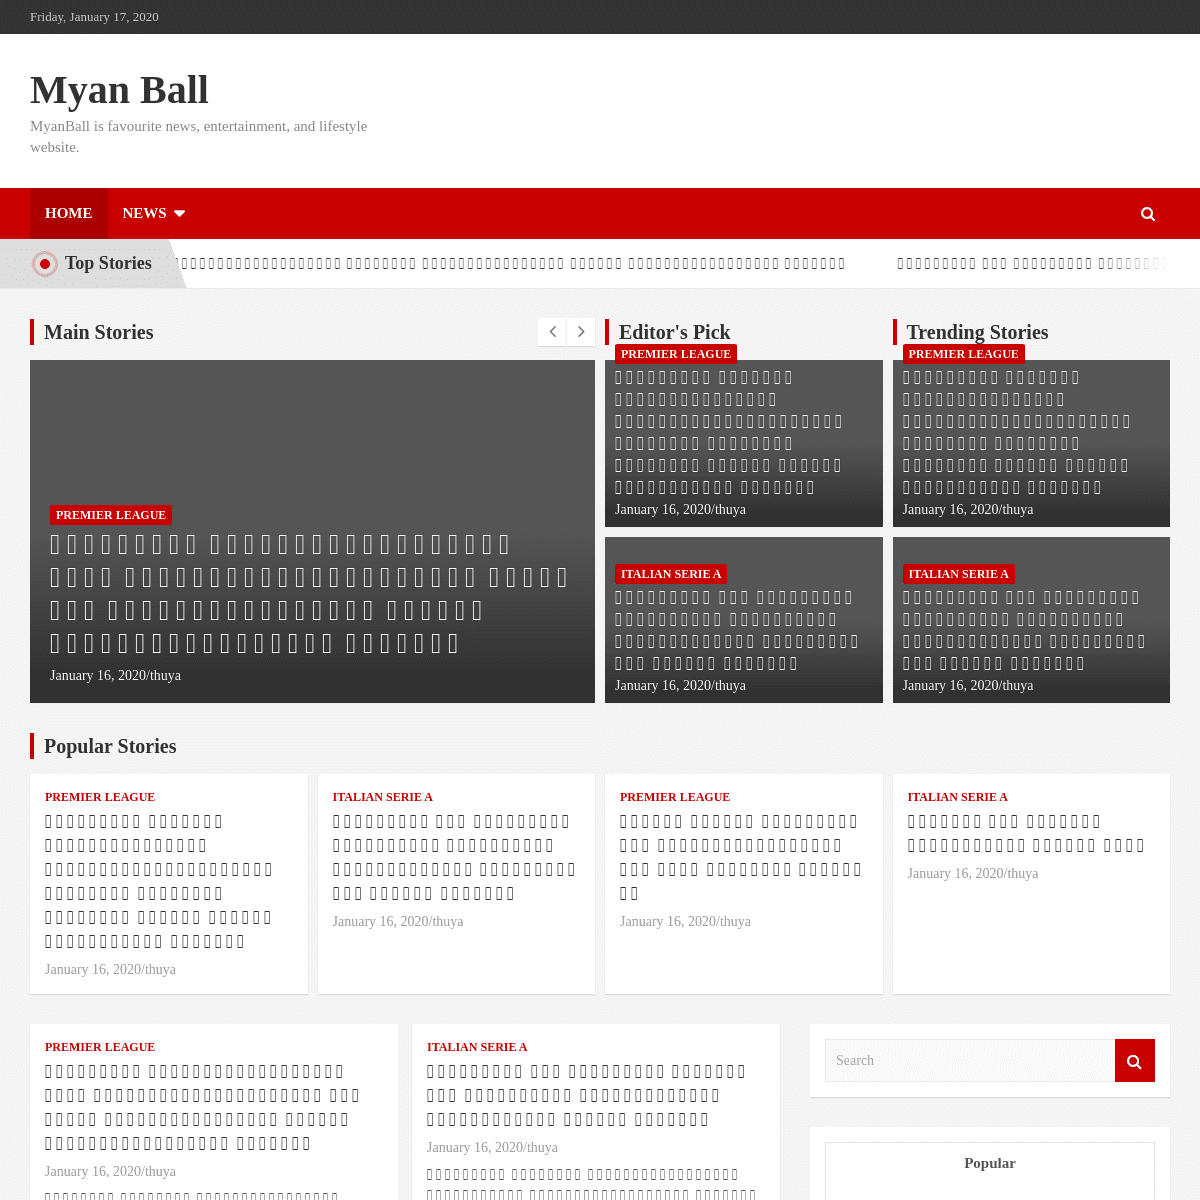 A complete backup of myanball.com